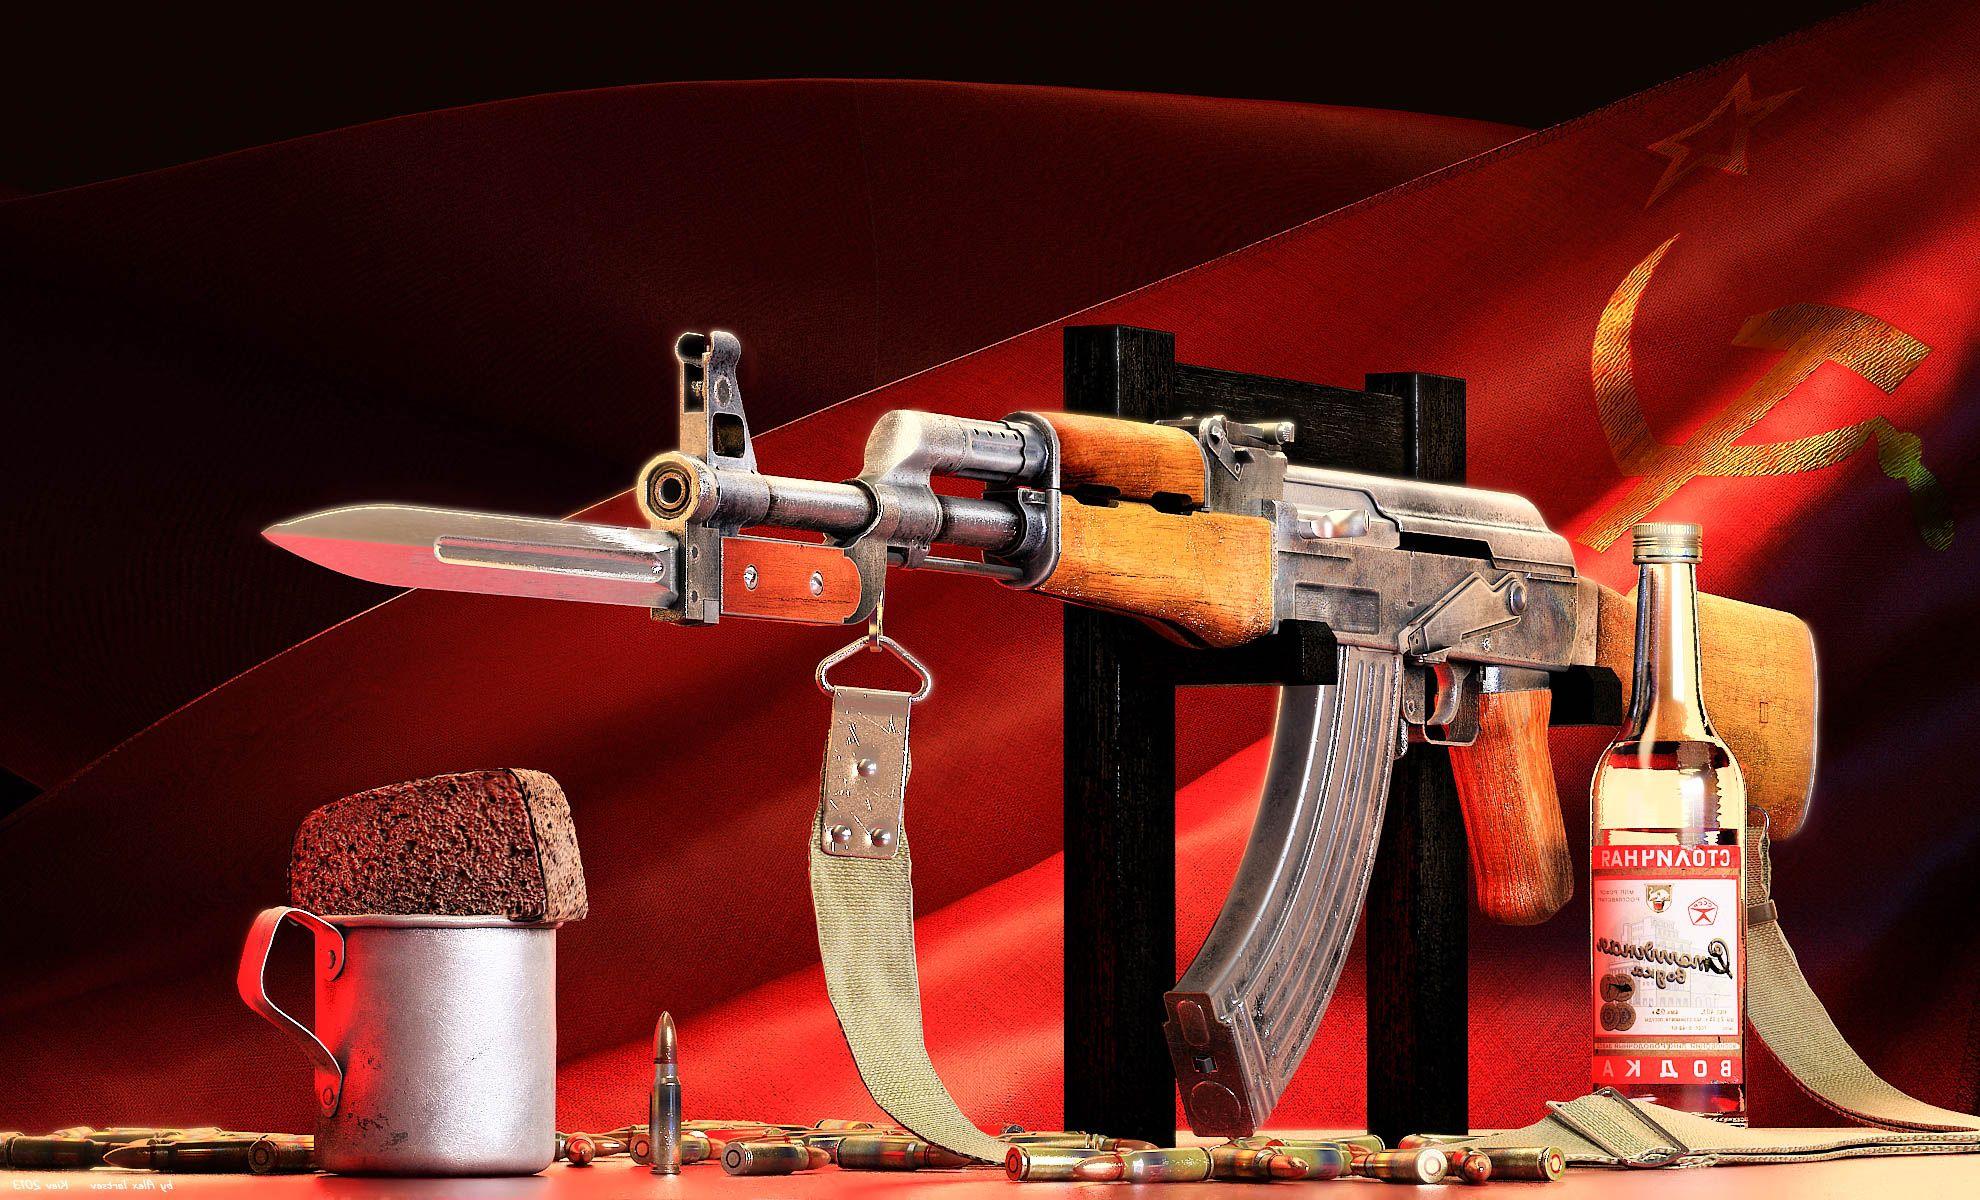 Ak 47 Awesome HD Wallpaper & Picture In High Resolution HD